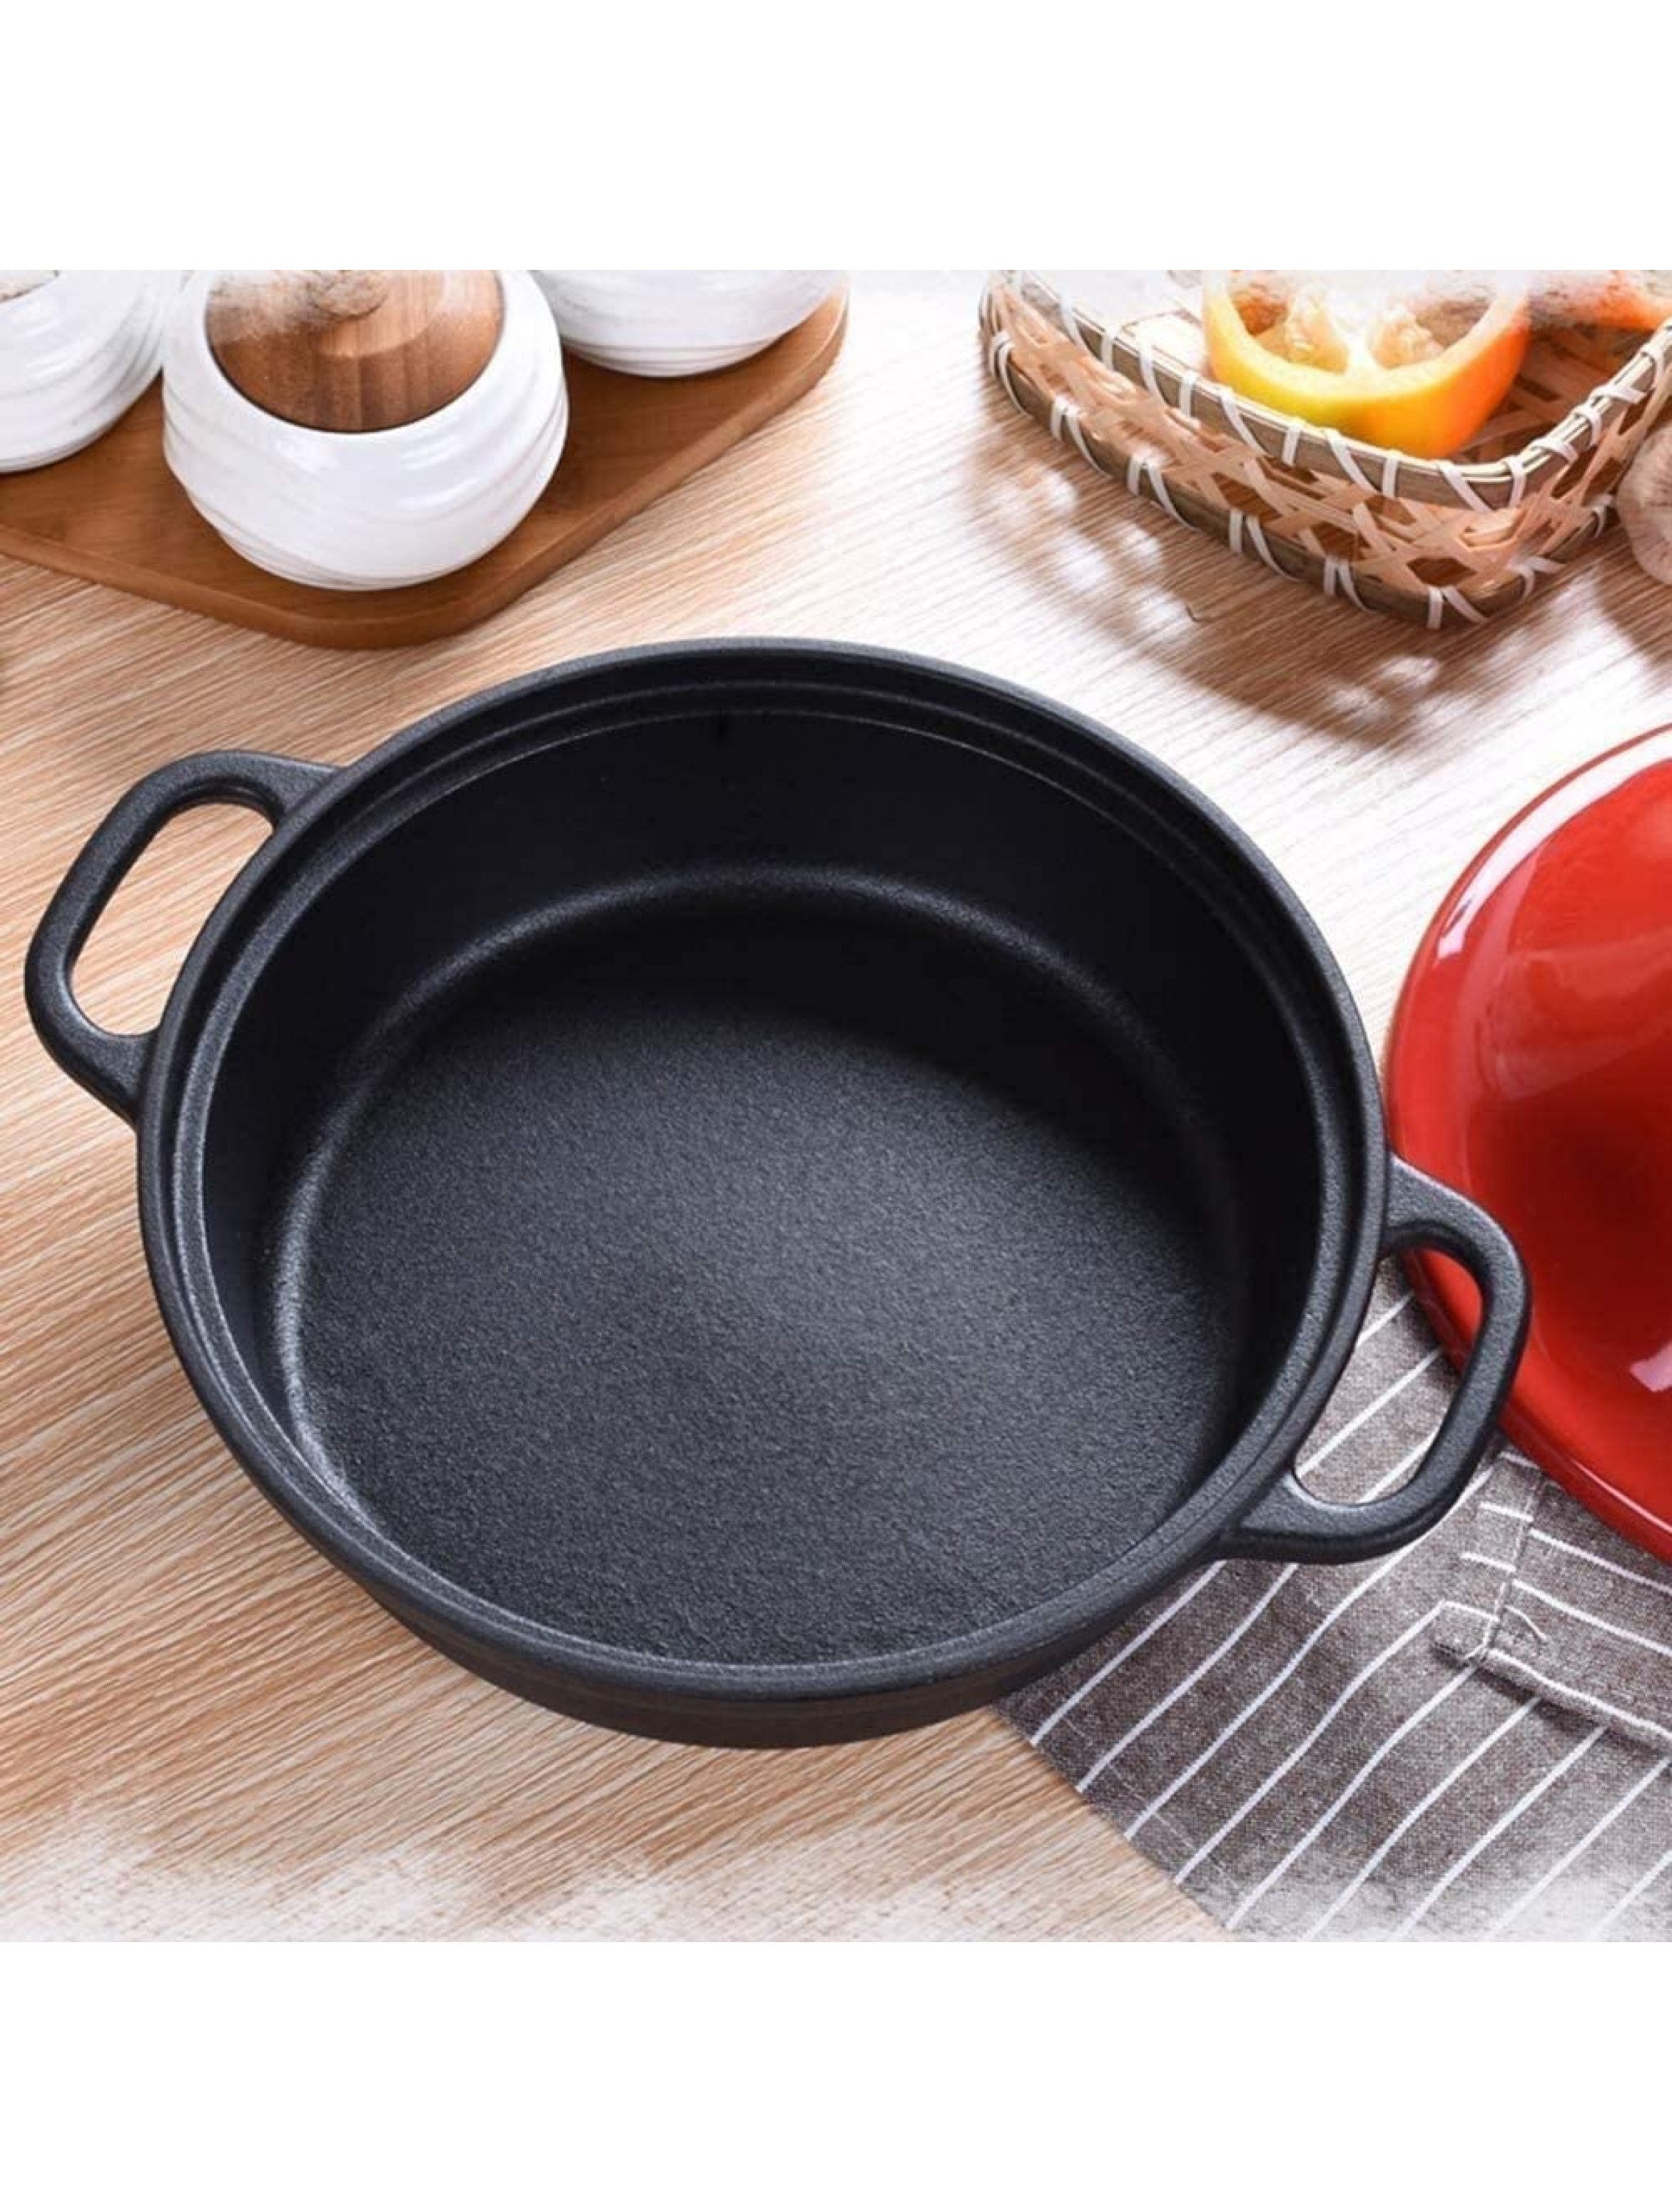 Enameled cast iron skillet Casserole Dishes with Lids 7. 9In Cast Iron Tagine Enameled Cast Iron Tangine with Ceramic Lid for Different Cooking Styles Tagine Pot Casserole Pot for Home Kitchen Casse - BDJVSSK0F